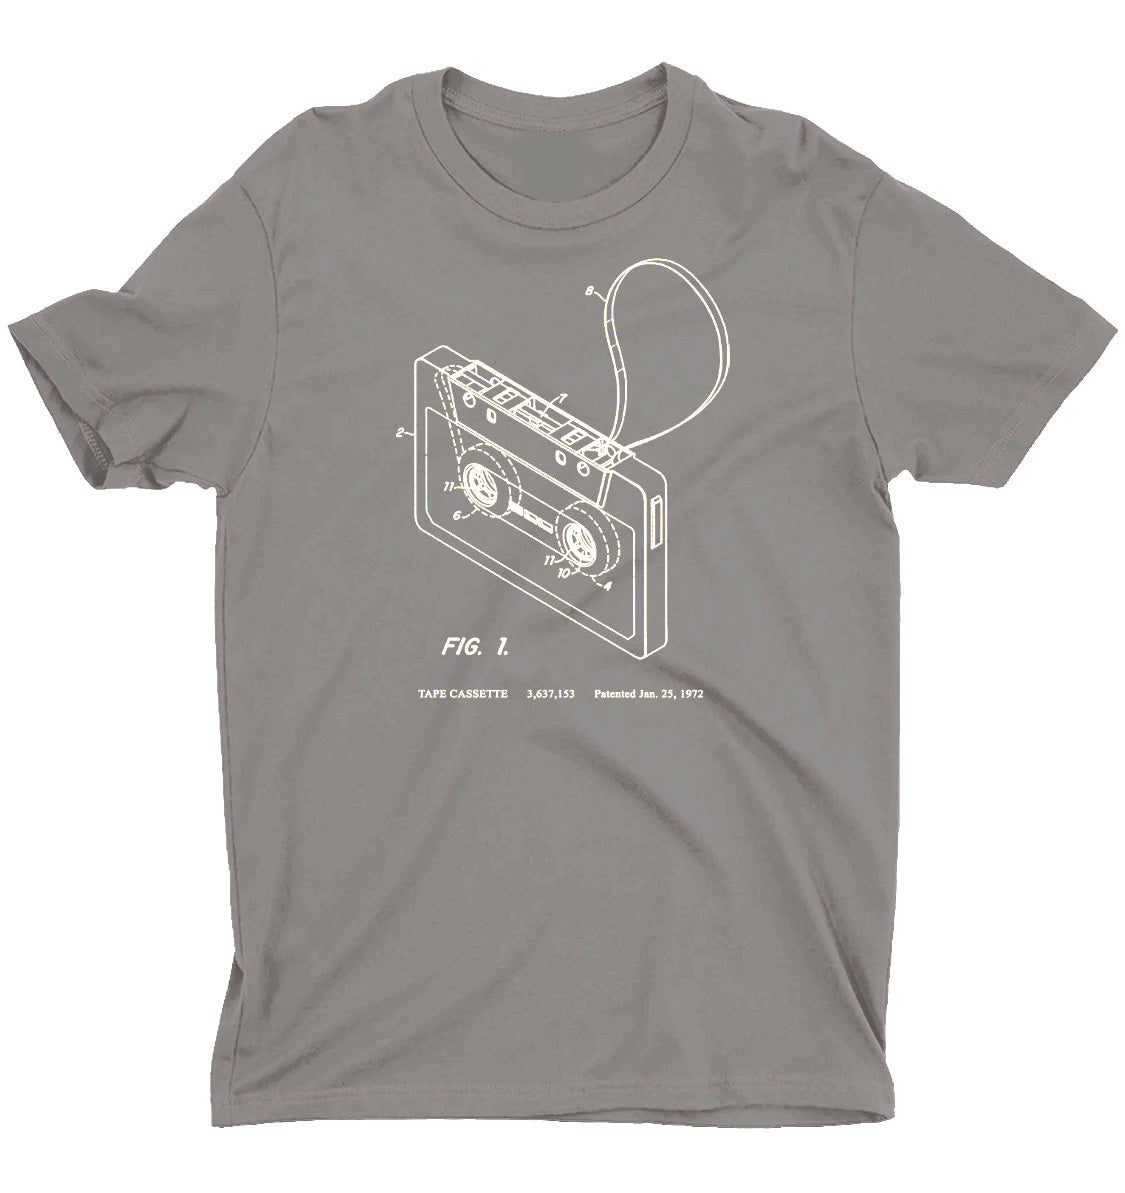 Patent T-Shirt - Cassette Tape with Beige Ink - NEW!